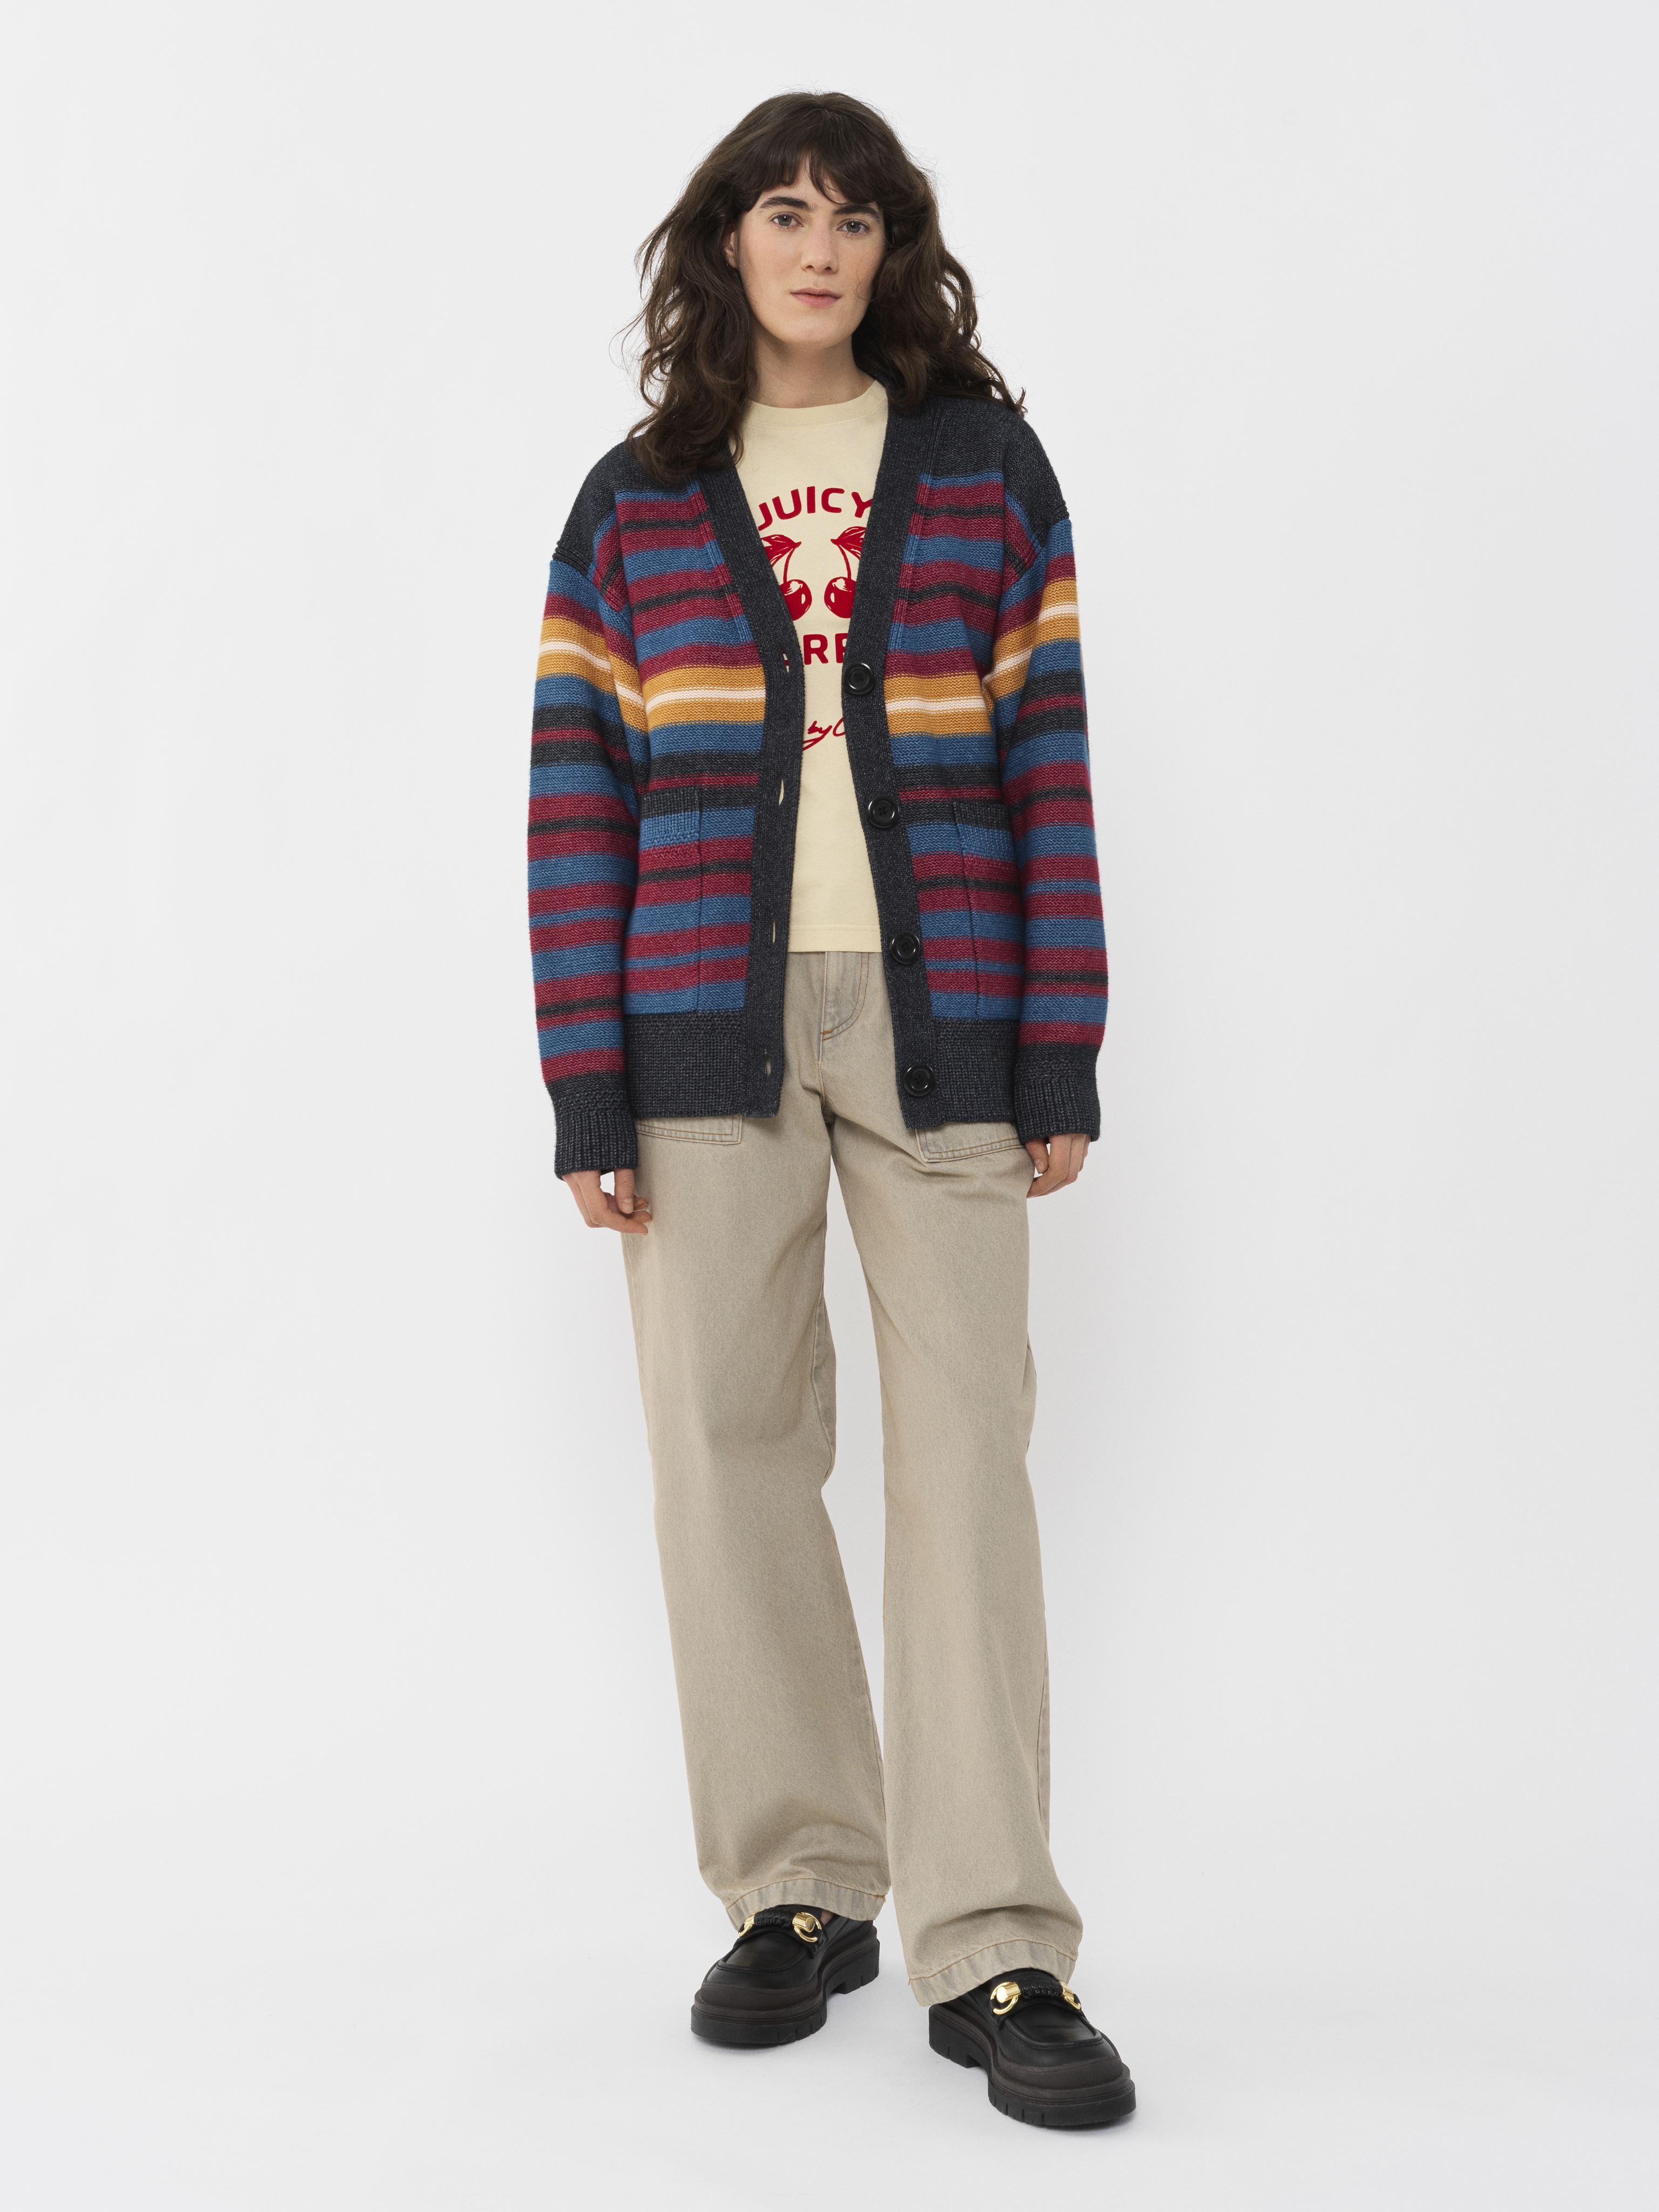 SEE BY CHLOÉ GRANDPA CARDIGAN MULTICOLOR SIZE L 60% POLYESTER, 35% COTTON, 5% WOOL